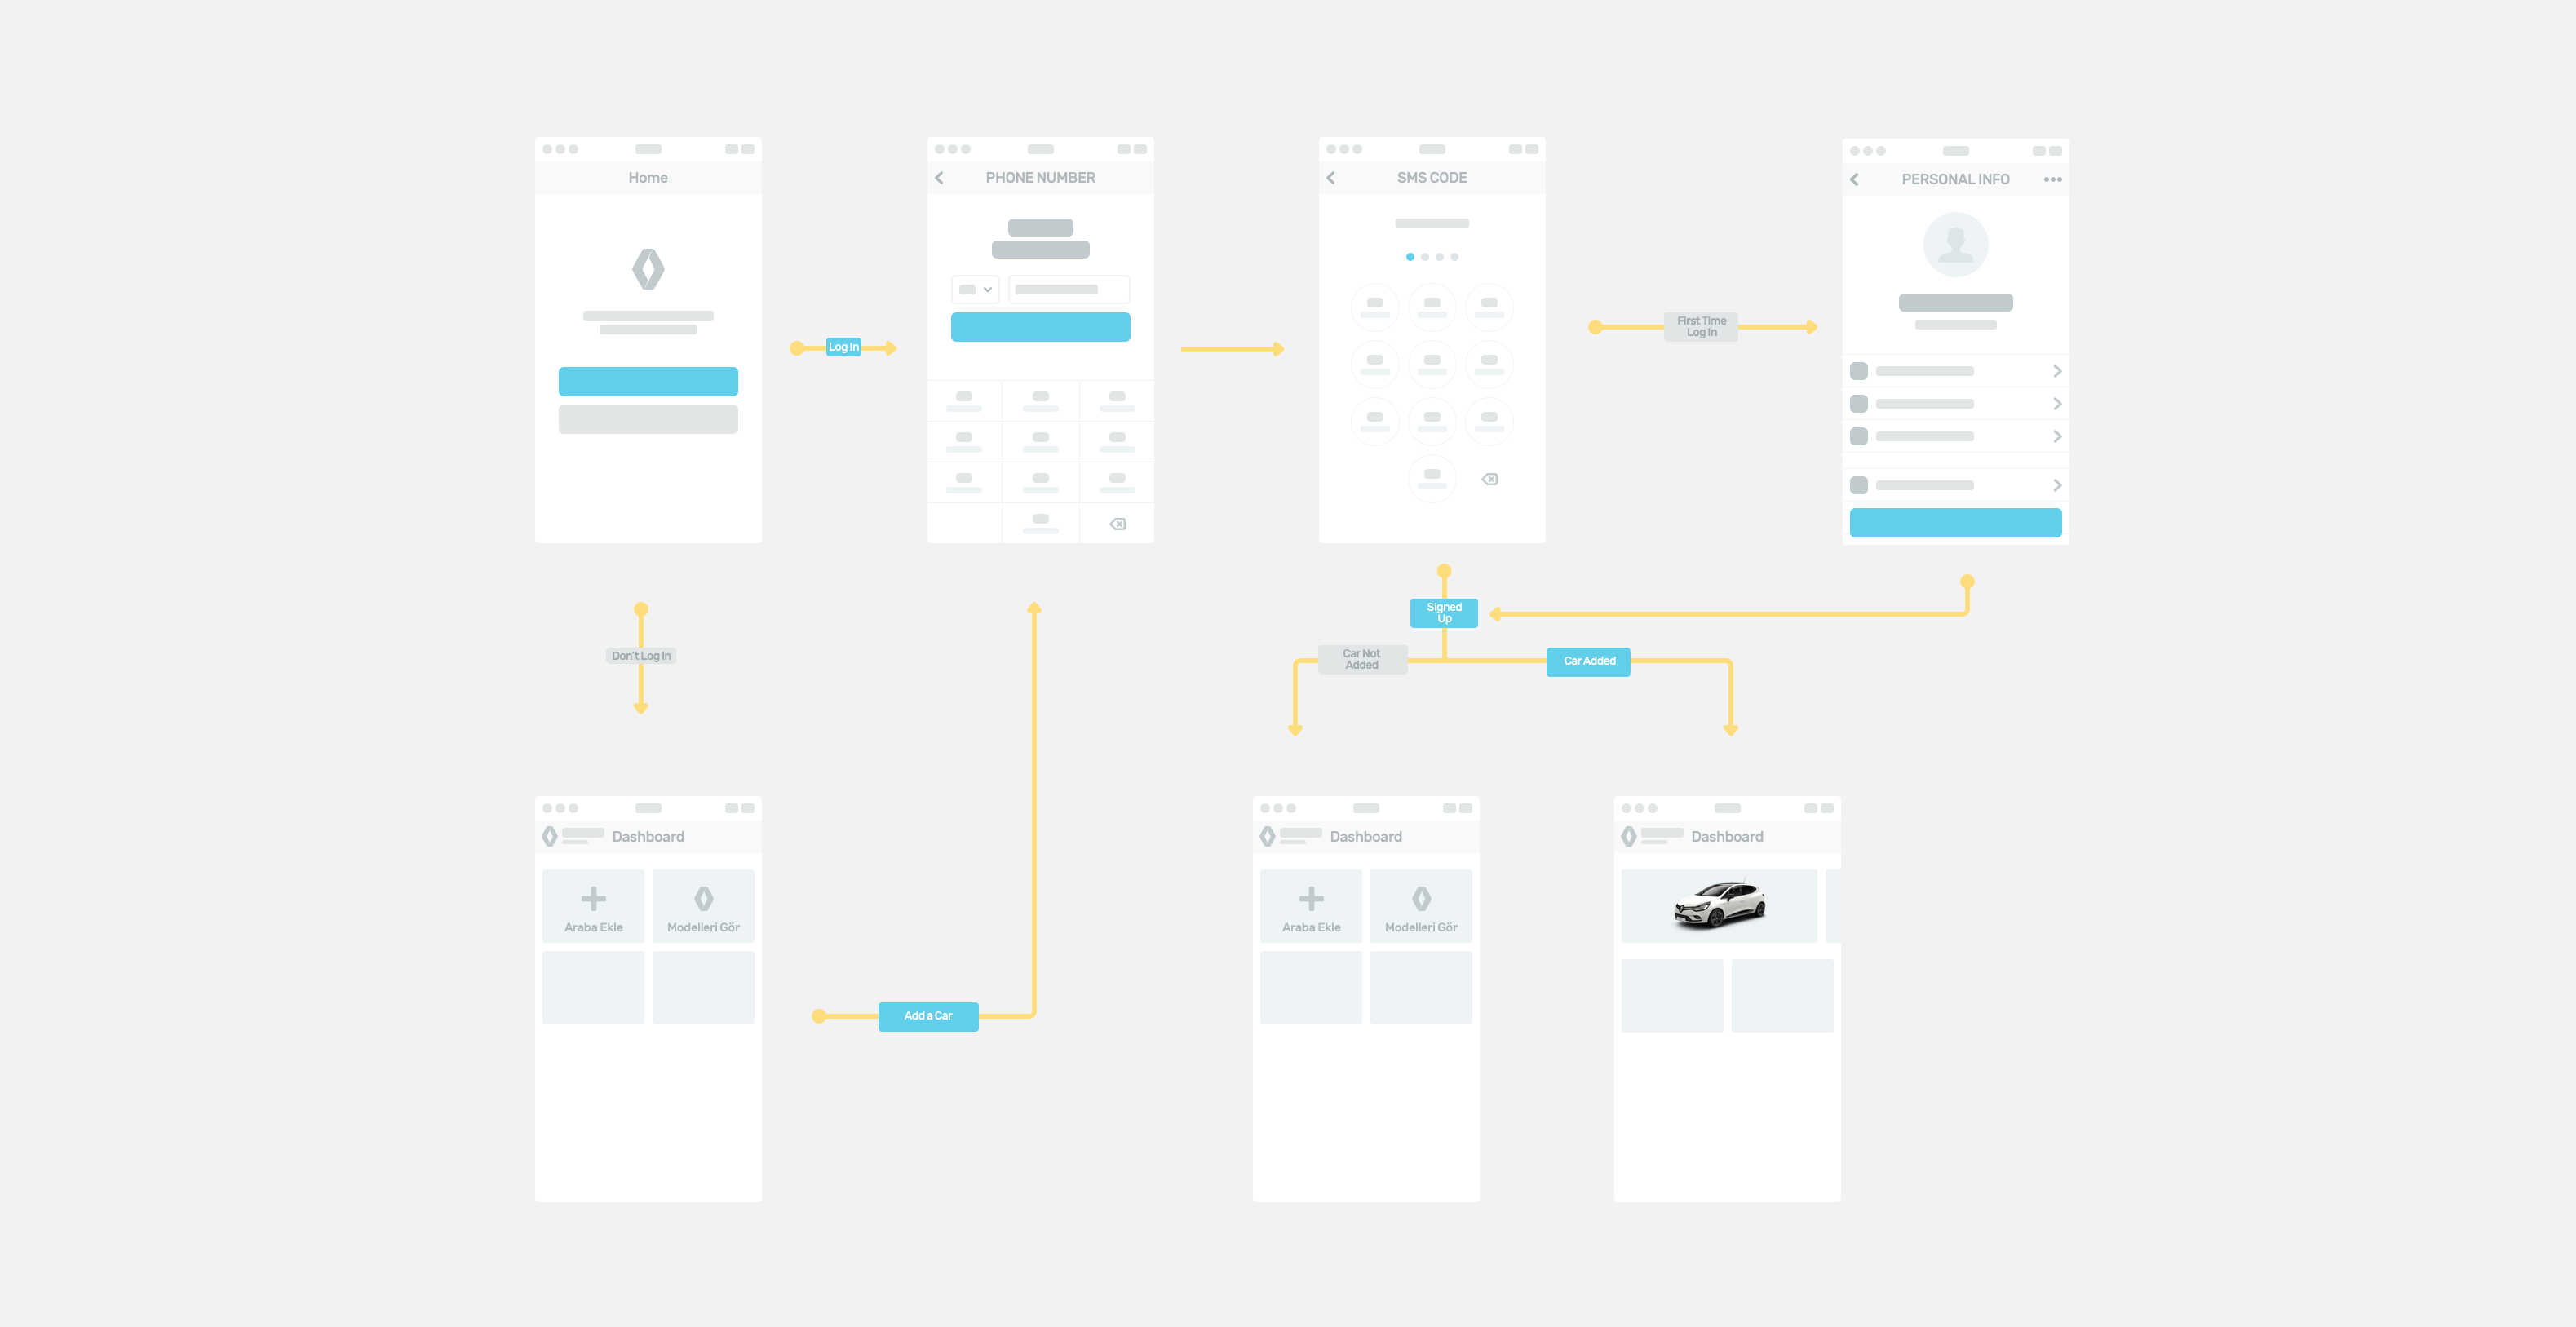 Login flow for the app, shown using wireframes and with alternate states.